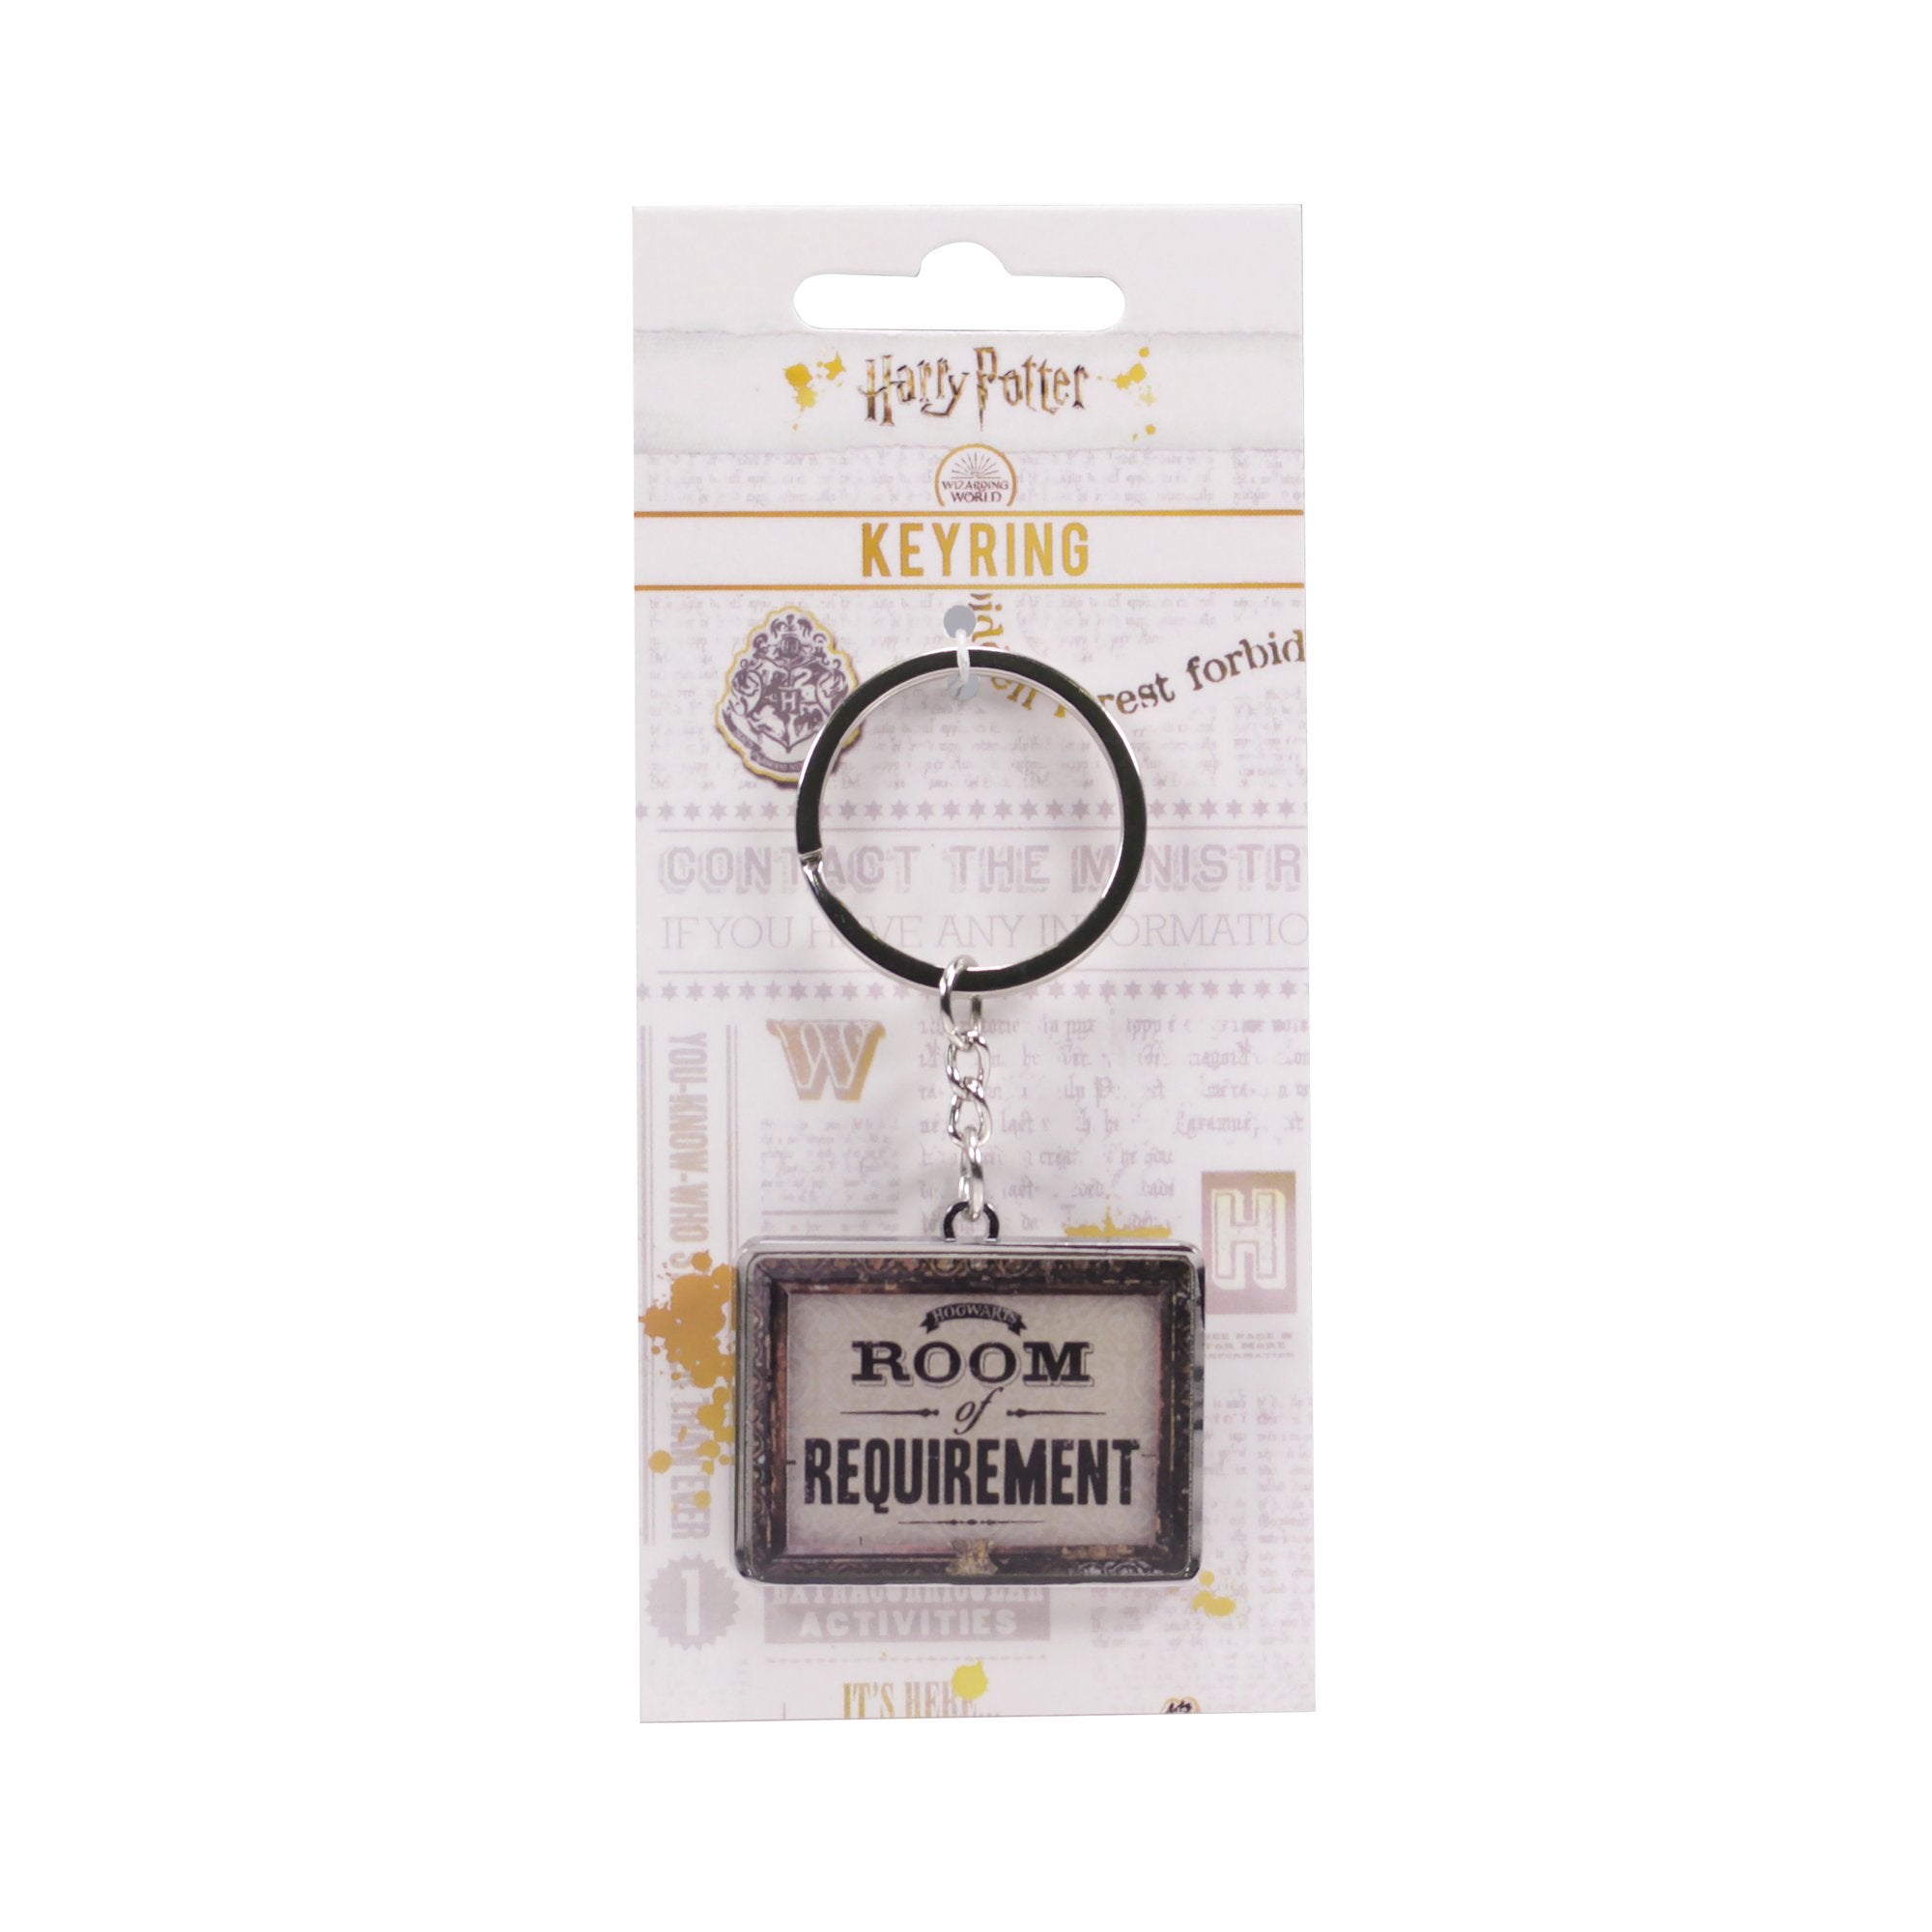 Harry Potter Keyring - Room of Requirement